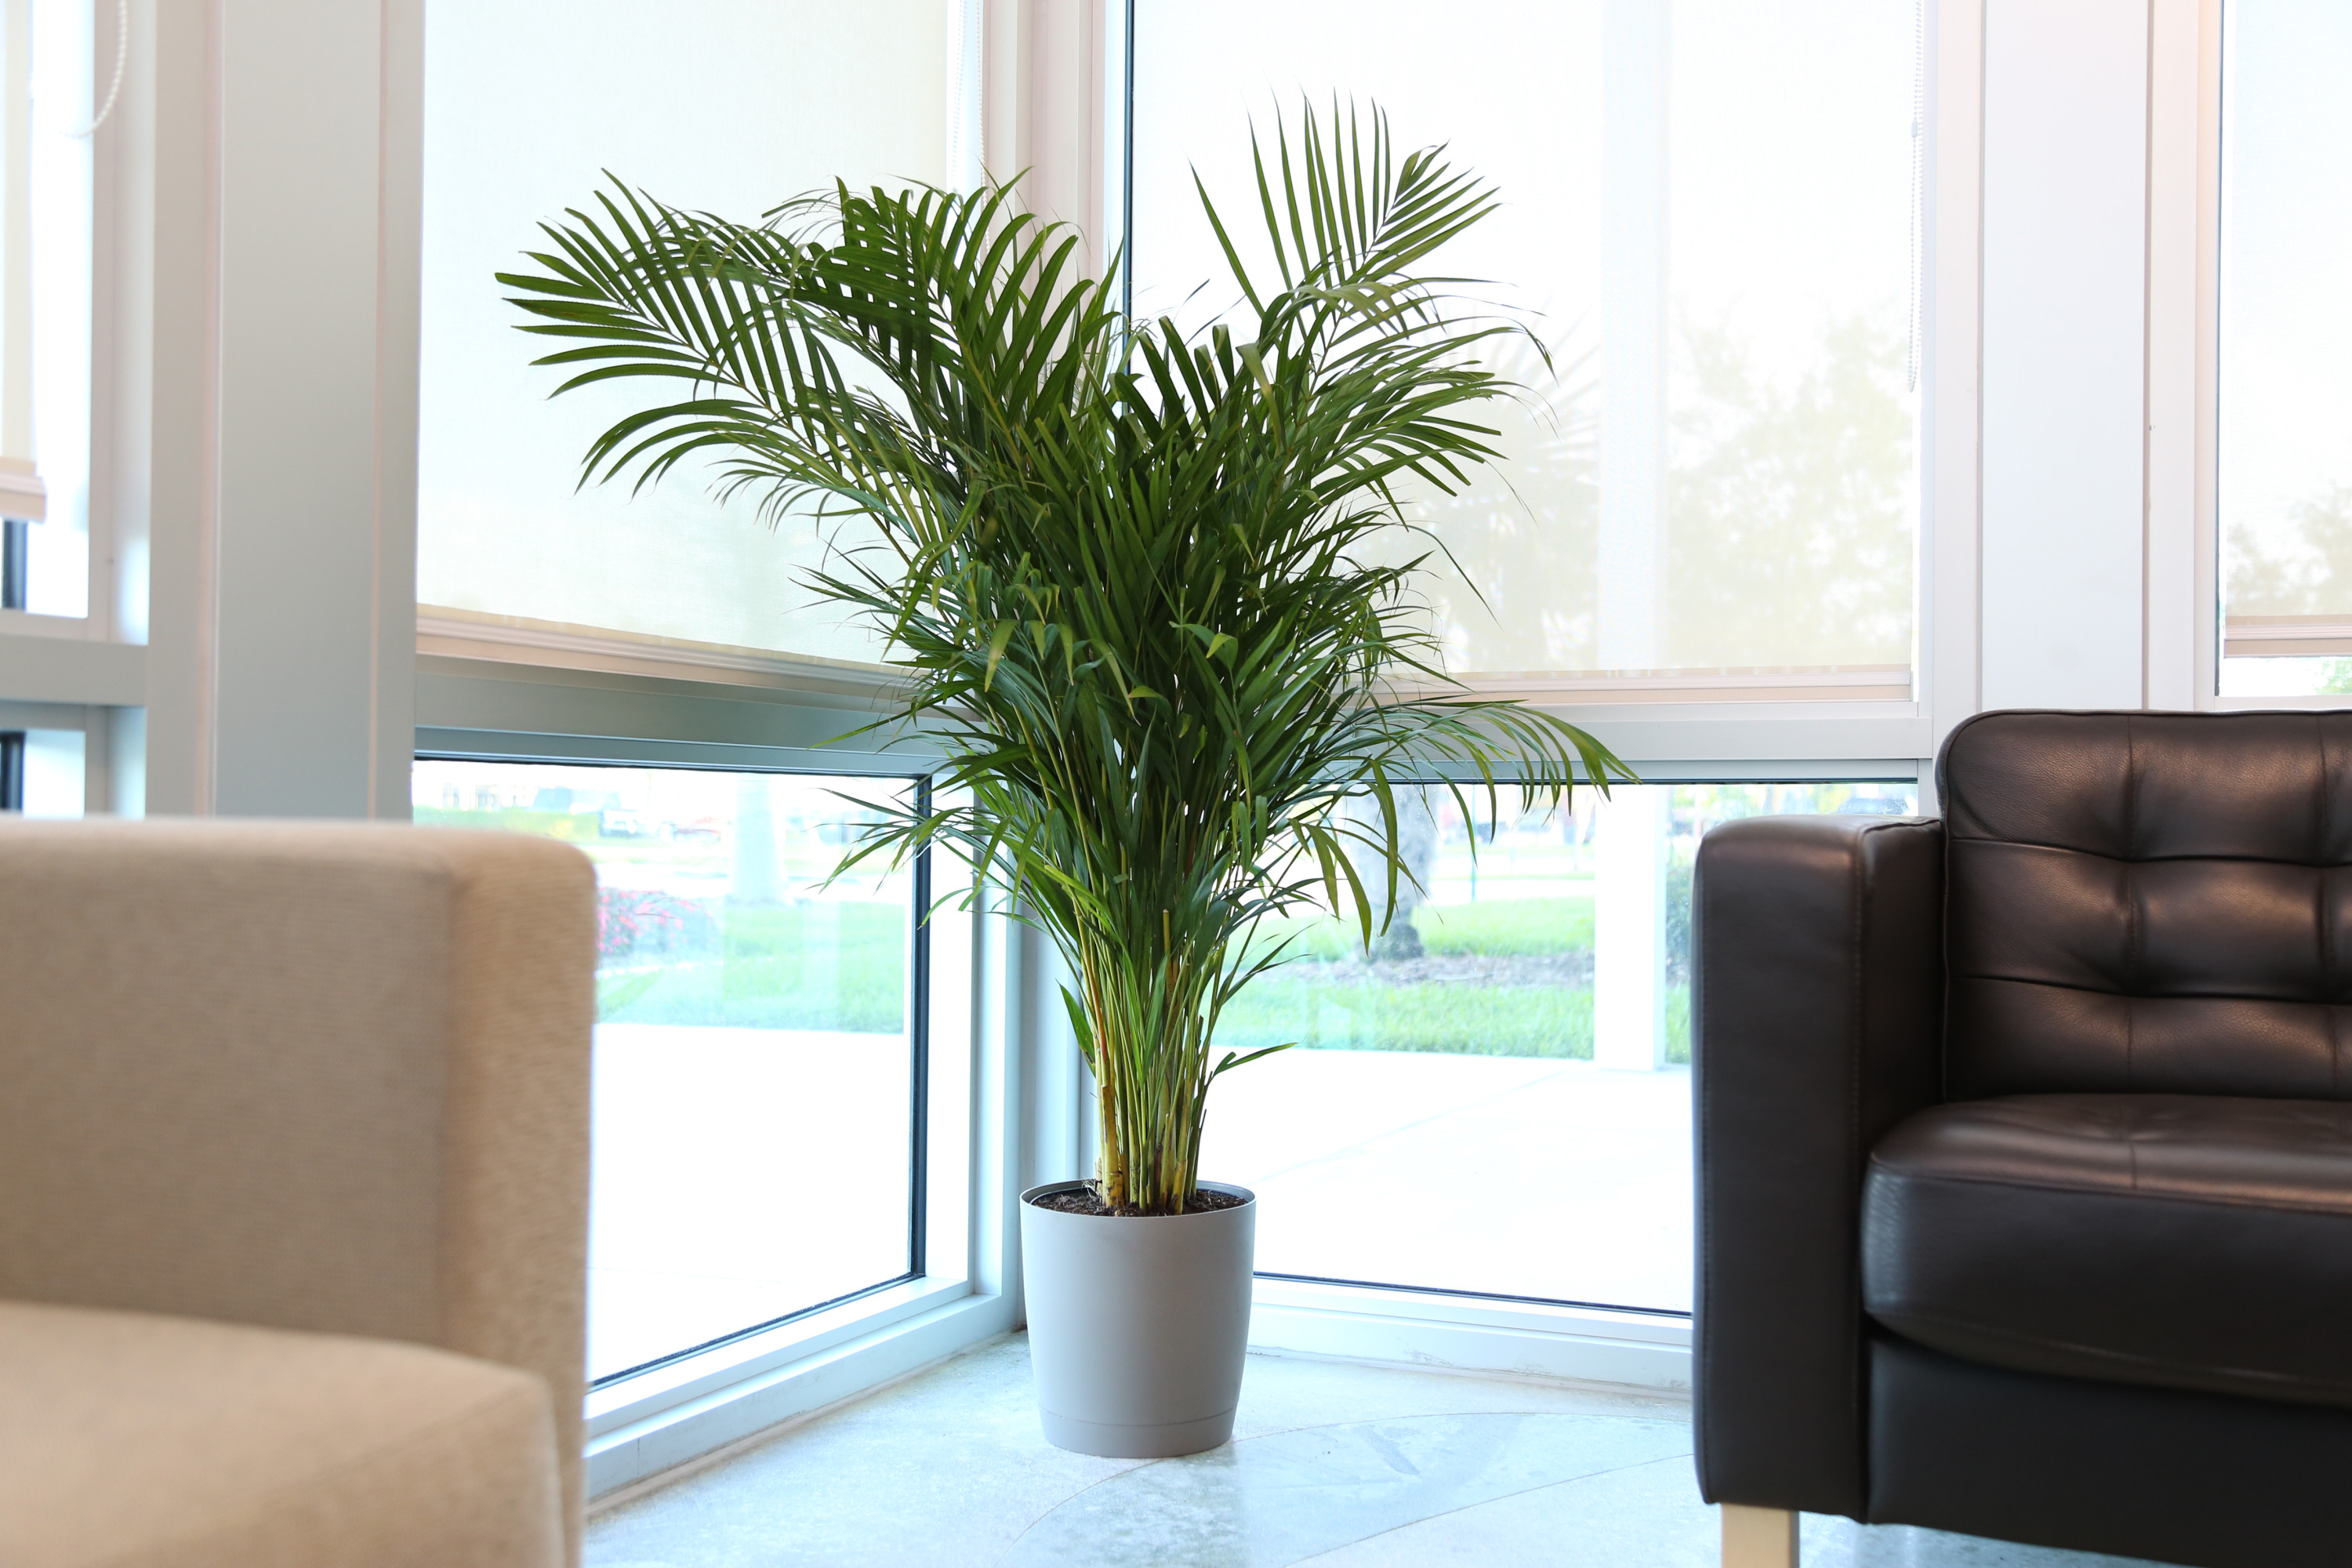 Live Indoor 36in. Tall Green Areca Palm; Bright, Indirect Sunlight Plant in 10in. Seagrass Planter - image 4 of 9